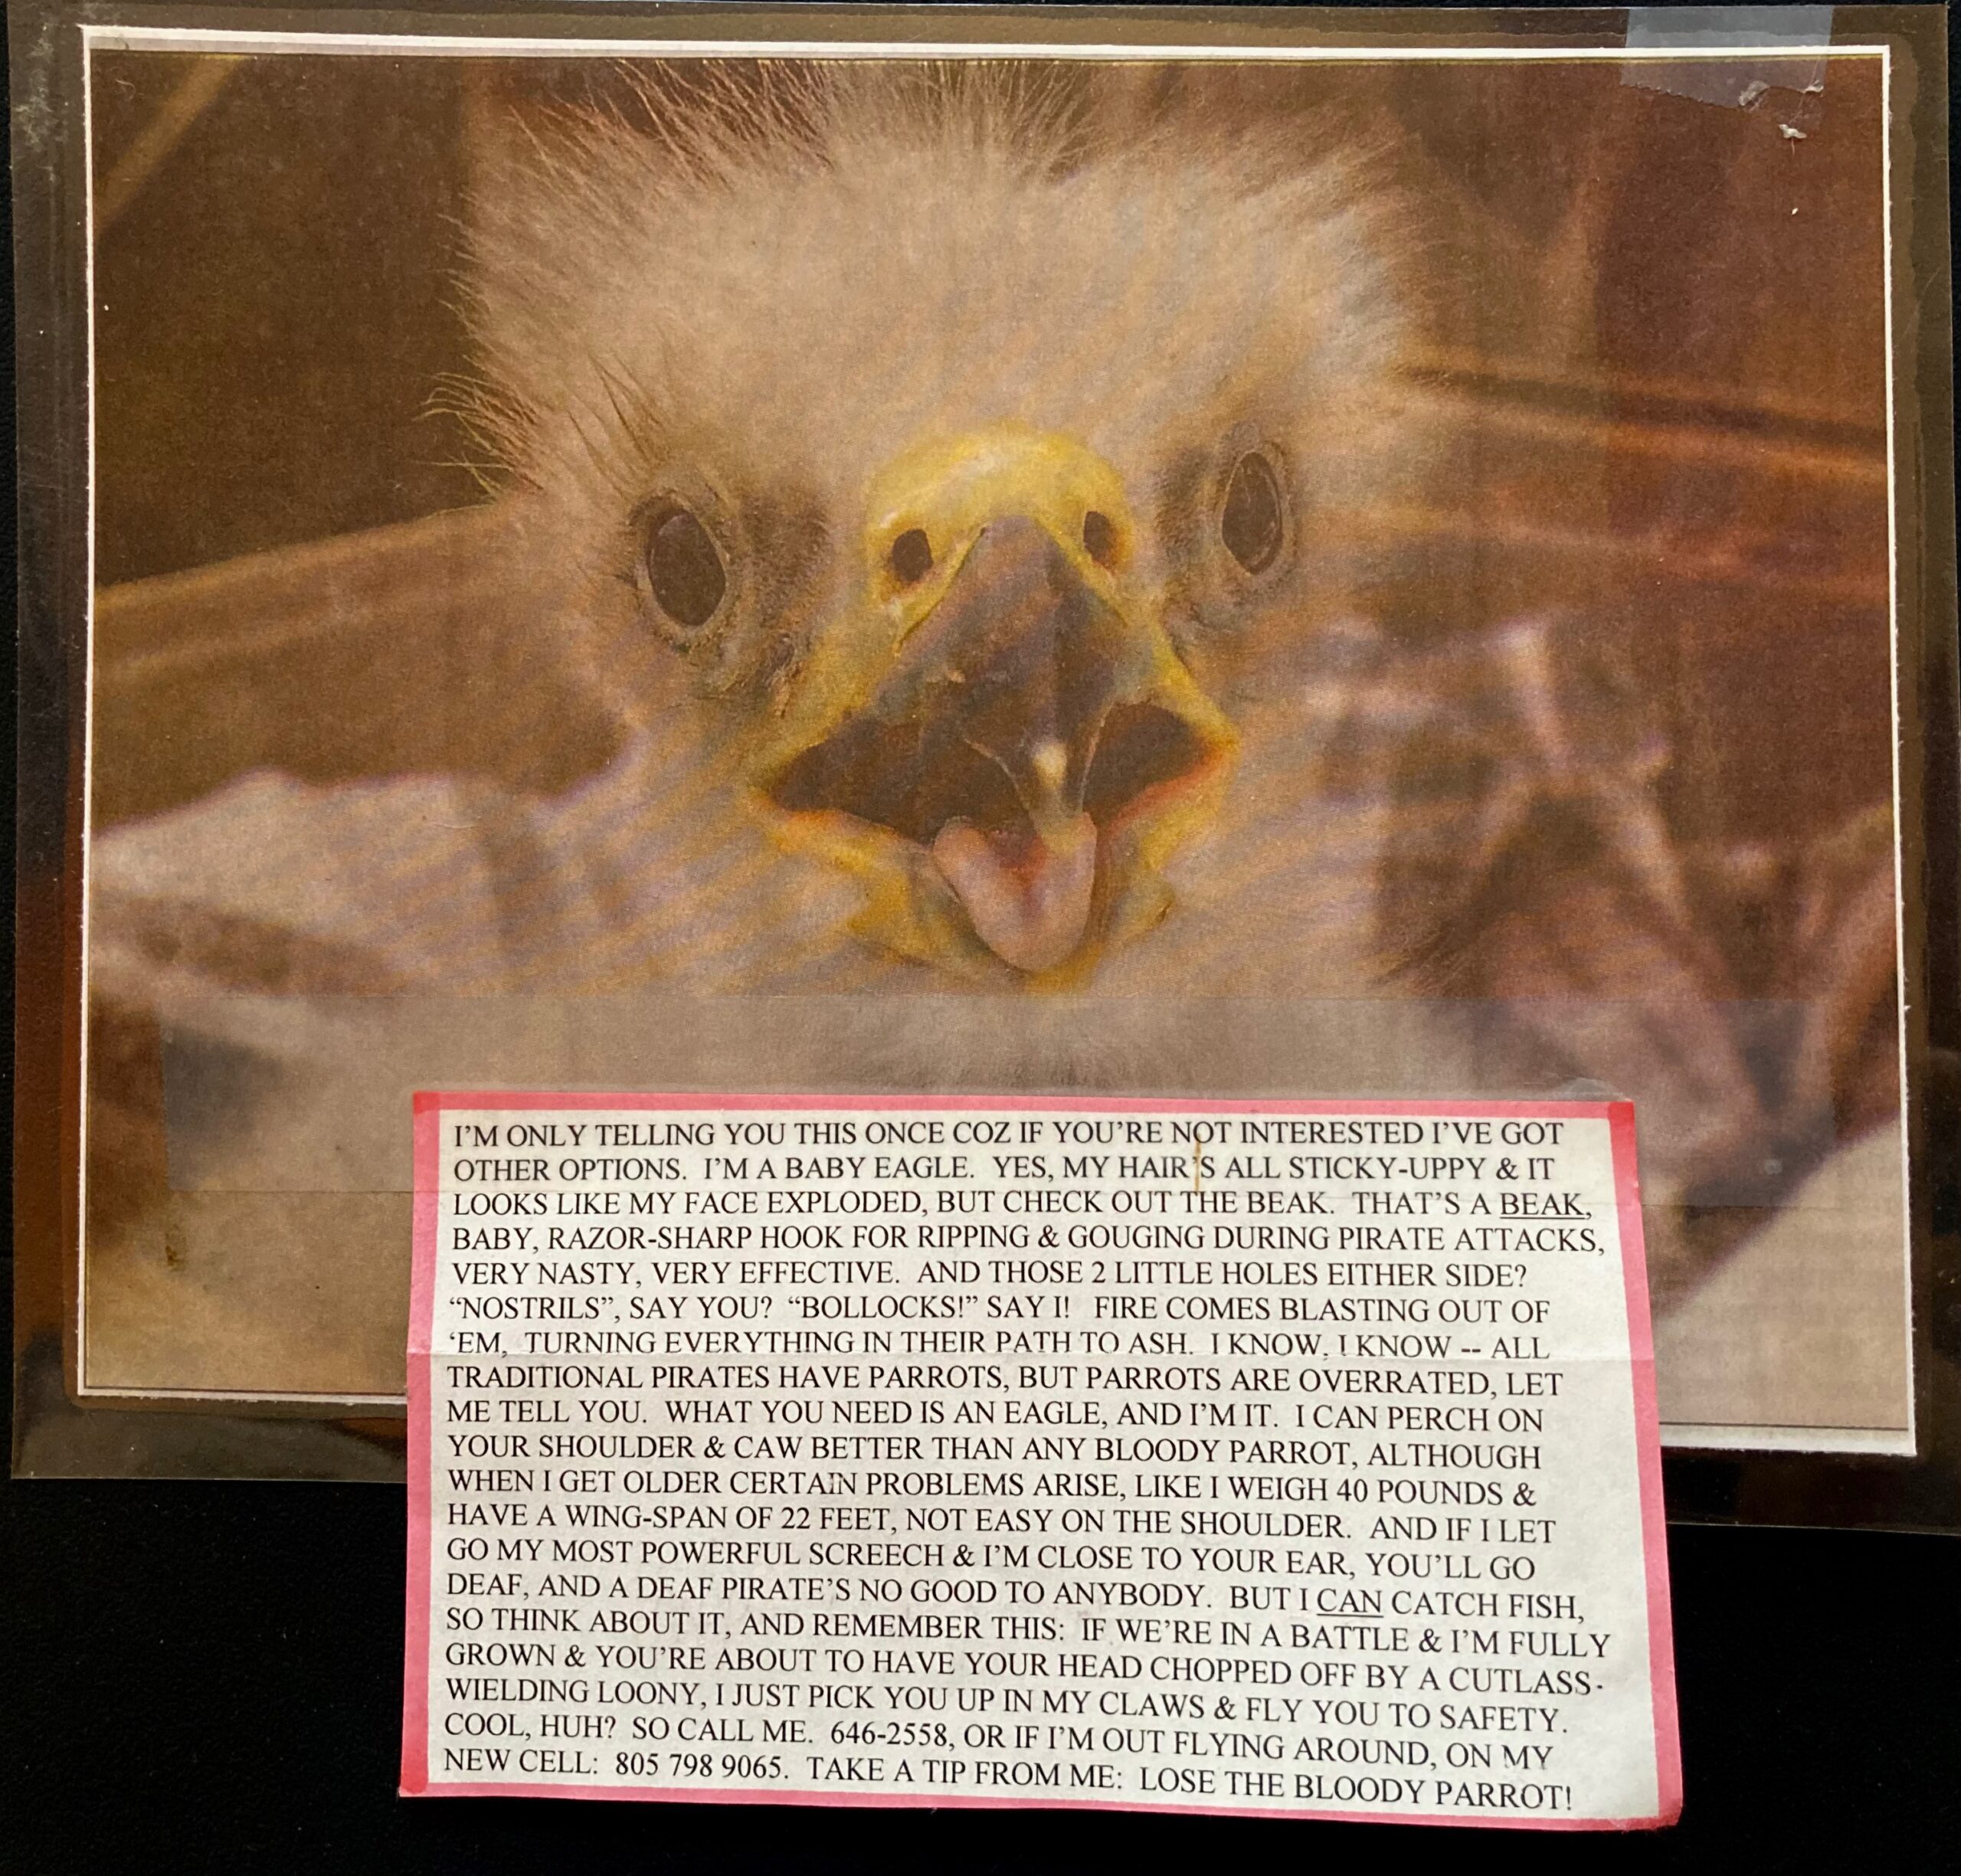 A photo of a surprised looking baby eagle, beak open, pop-eyed, staring at the camera. Below the photo is a block of all-caps text taped to the frame that reads "i’m only telling you this once coz if you’re not interested i’ve got other options. i’m a baby eagle. yes, my hair’s all sticky-uppy & it looks like my face exploded, but check out the beak. that’s a beak, baby, razor-sharp hook for ripping & gouging during pirate attacks, very nasty, very effective. and those 2 little holes either side? “nostrils”, say you? “bollocks!” say i! fire comes blasting out of ‘em. turning everything in their path to ash. i know. i know — all traditional pirates have parrots, but parrots are overrated. let me tell you. what you need is an eagle, and i’m it. i can perch on your shoulder & caw better than any bloody parrot. although when i get older certain problems arise, like i weigh 40 pounds & have a wing-span of 22 feet, not easy on the shoulder. and if i let go my most powerful screech & i’m close to your ear, you’ll go deaf, and a deaf pirate’s no good to anybody. but i can catch fish. so think about it, and remember this: if we’re in a battle & i’m fully grown & you’re about to have your head chopped off by a cutlass. wielding loony, i just pick you up in my claws & fly you to safety. cool, huh? so call me. 646-2558, or if i’m out flying around on my new cell: 805 798 9065. take a tip from me: lose the bloody parrot!"